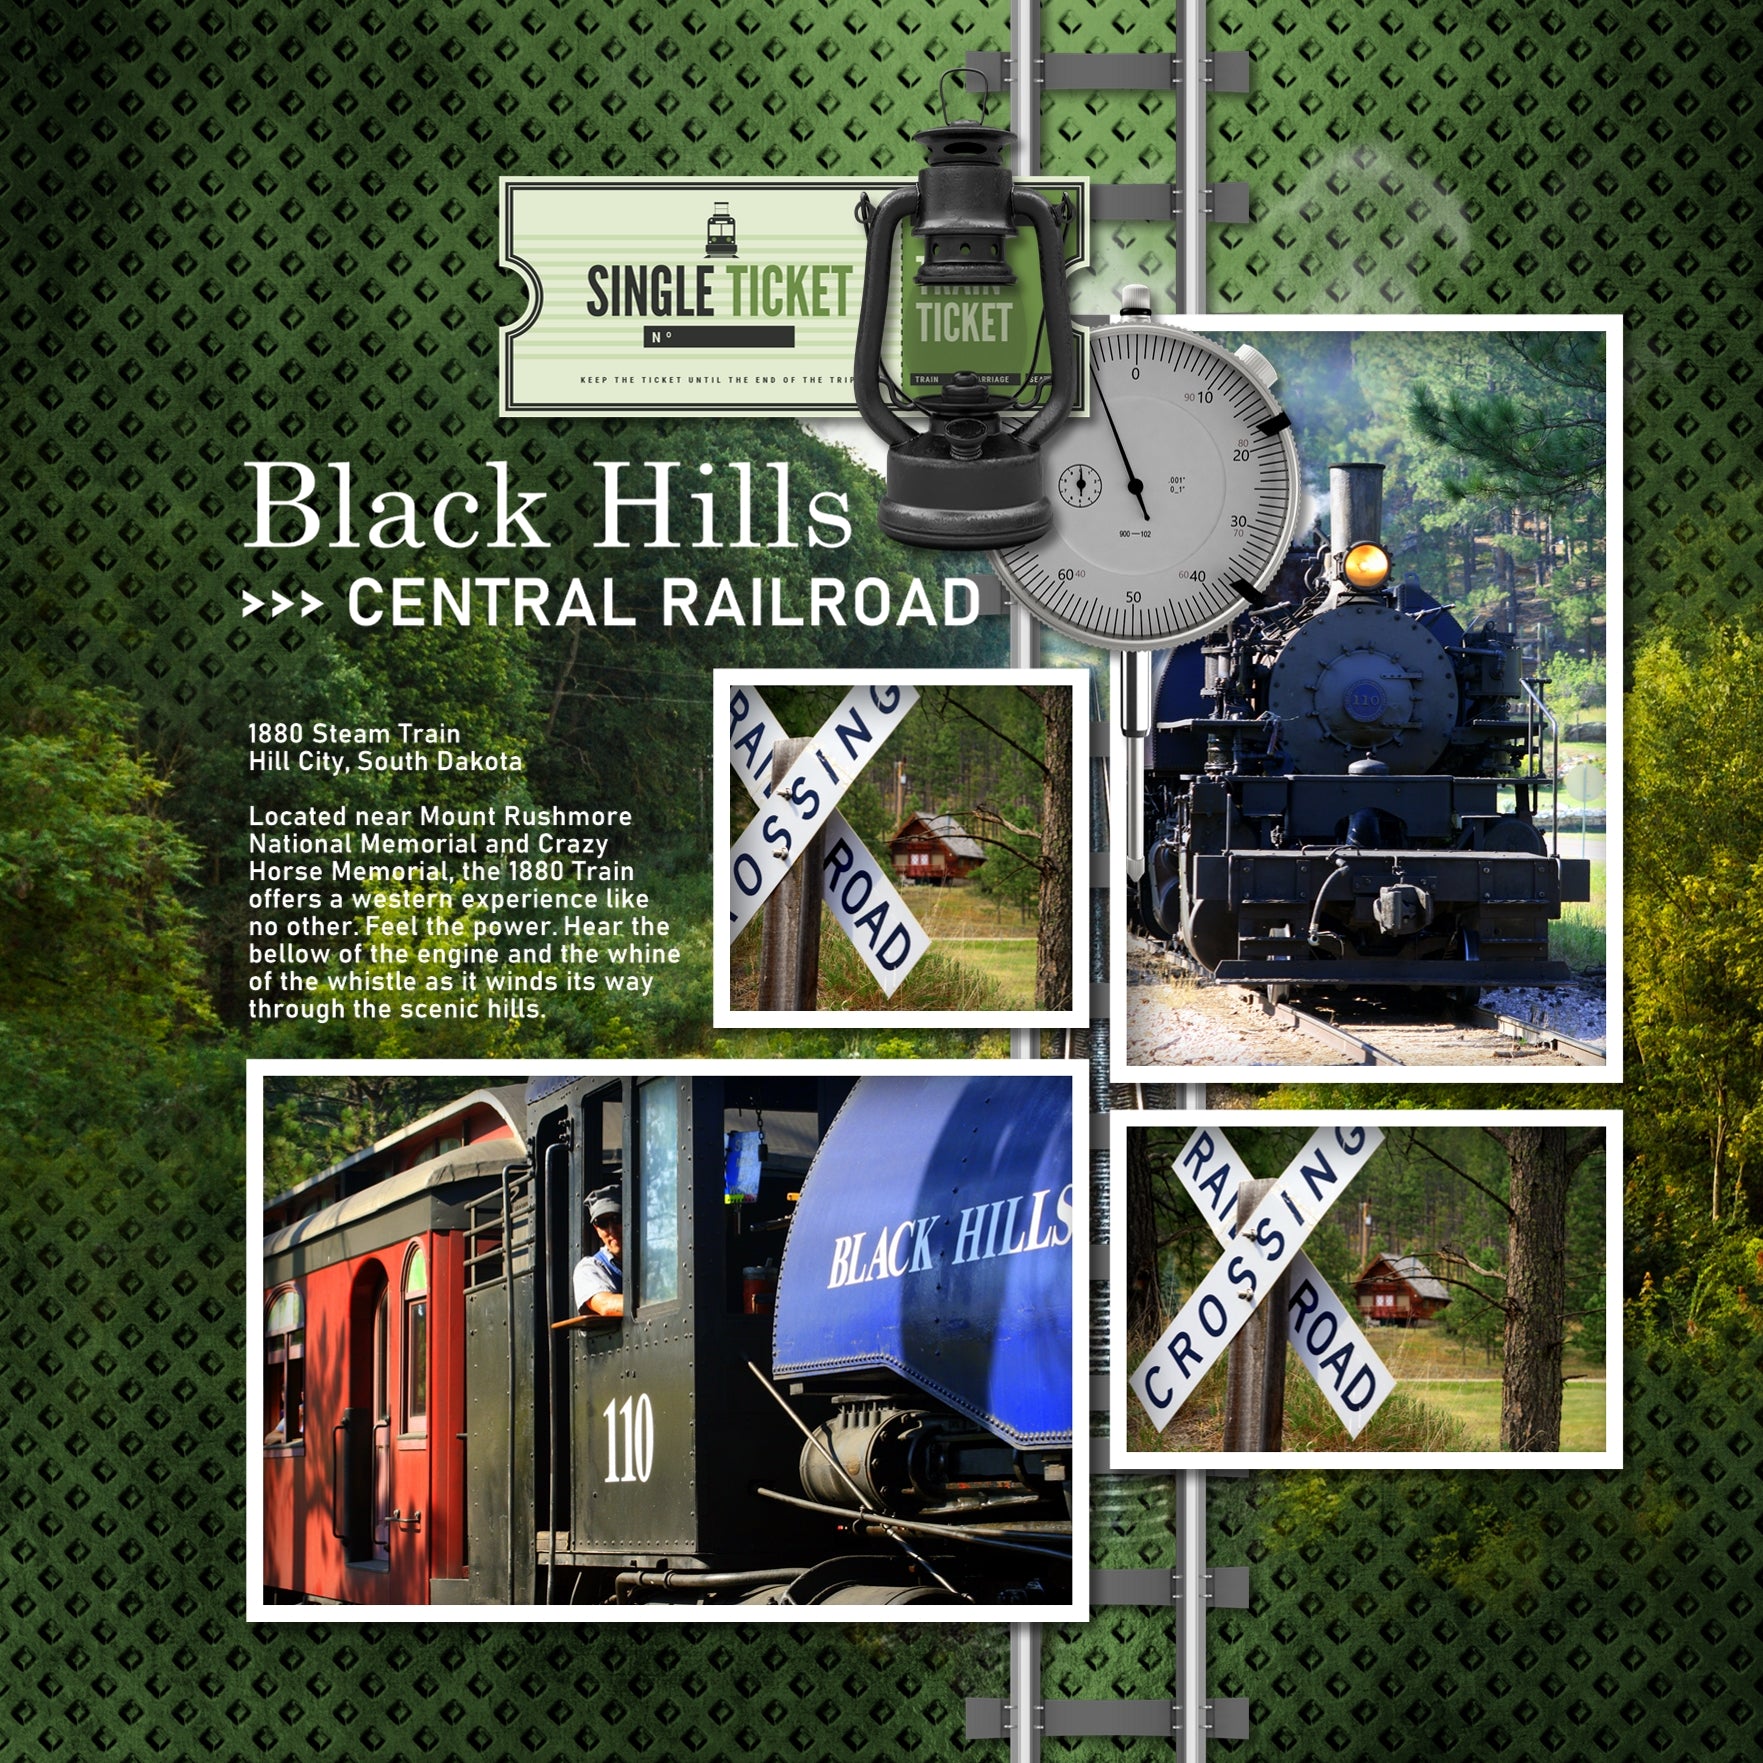 Choo-Choo! These fun digital scrapbooking papers by Lucky Girl Creative digital art are your ticket to ride on any page featuring train travel, railroad adventures, subway, tram, cable car, metro, and locomotive museums. Masculine black and silver grunge papers include 20 various textures.